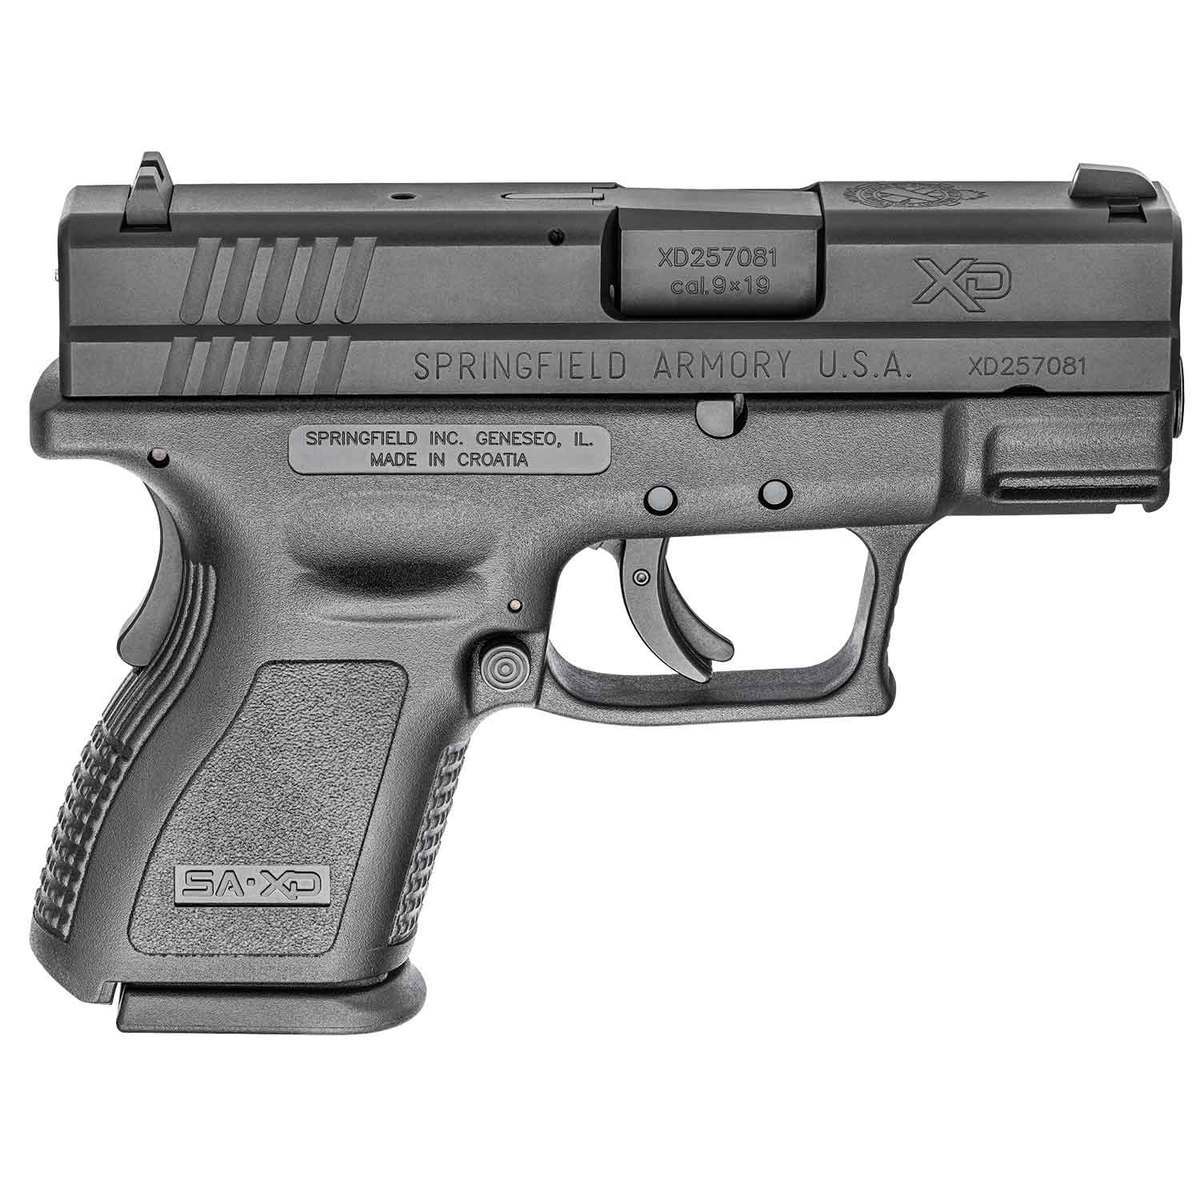 springfield-armory-xd-defender-sub-combact-9mm-luger-3in-black-pistol-13-1-rounds-sportsman